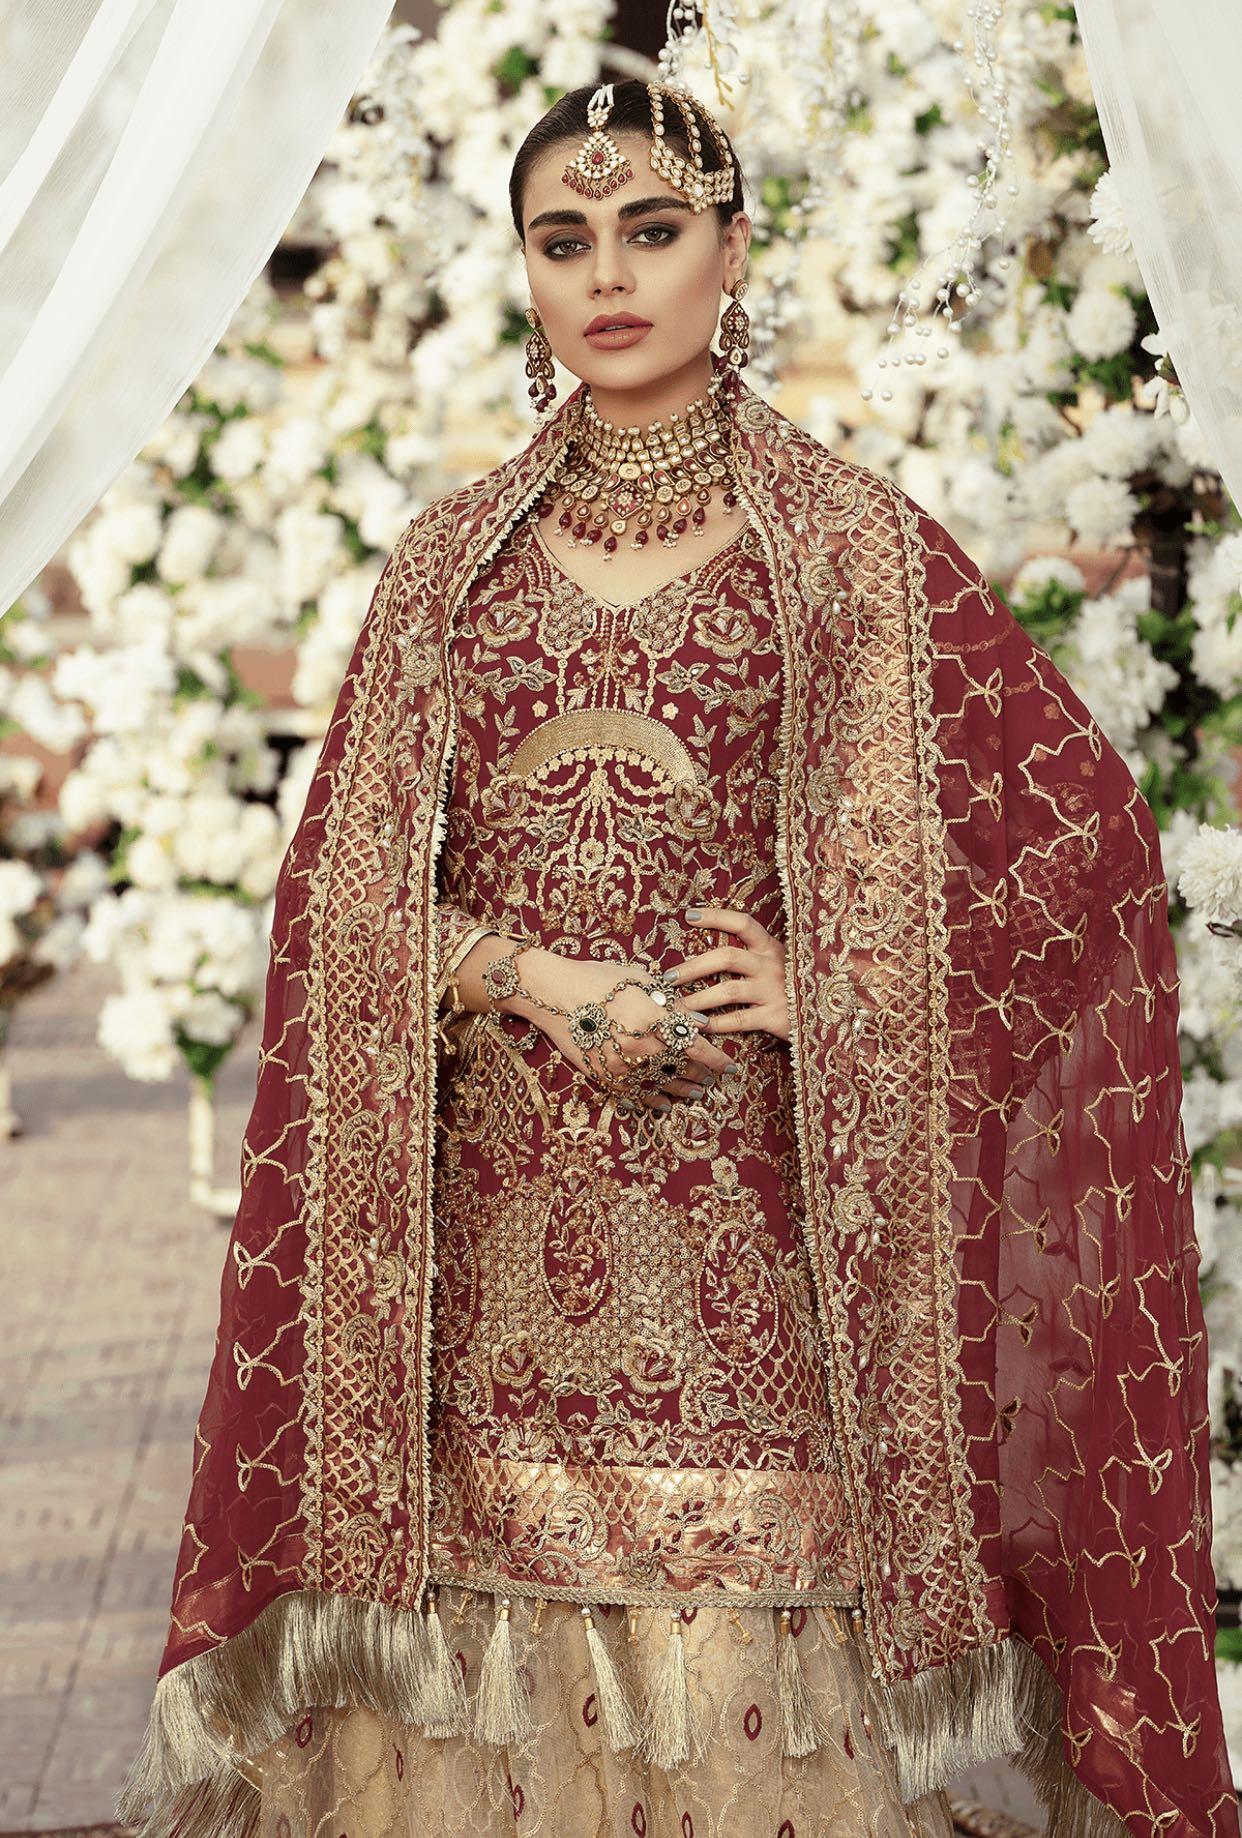 This Punjabi Bride Chose A Unique Coloured Lehenga From Rimple And Harpreet  For Her Wedding Day